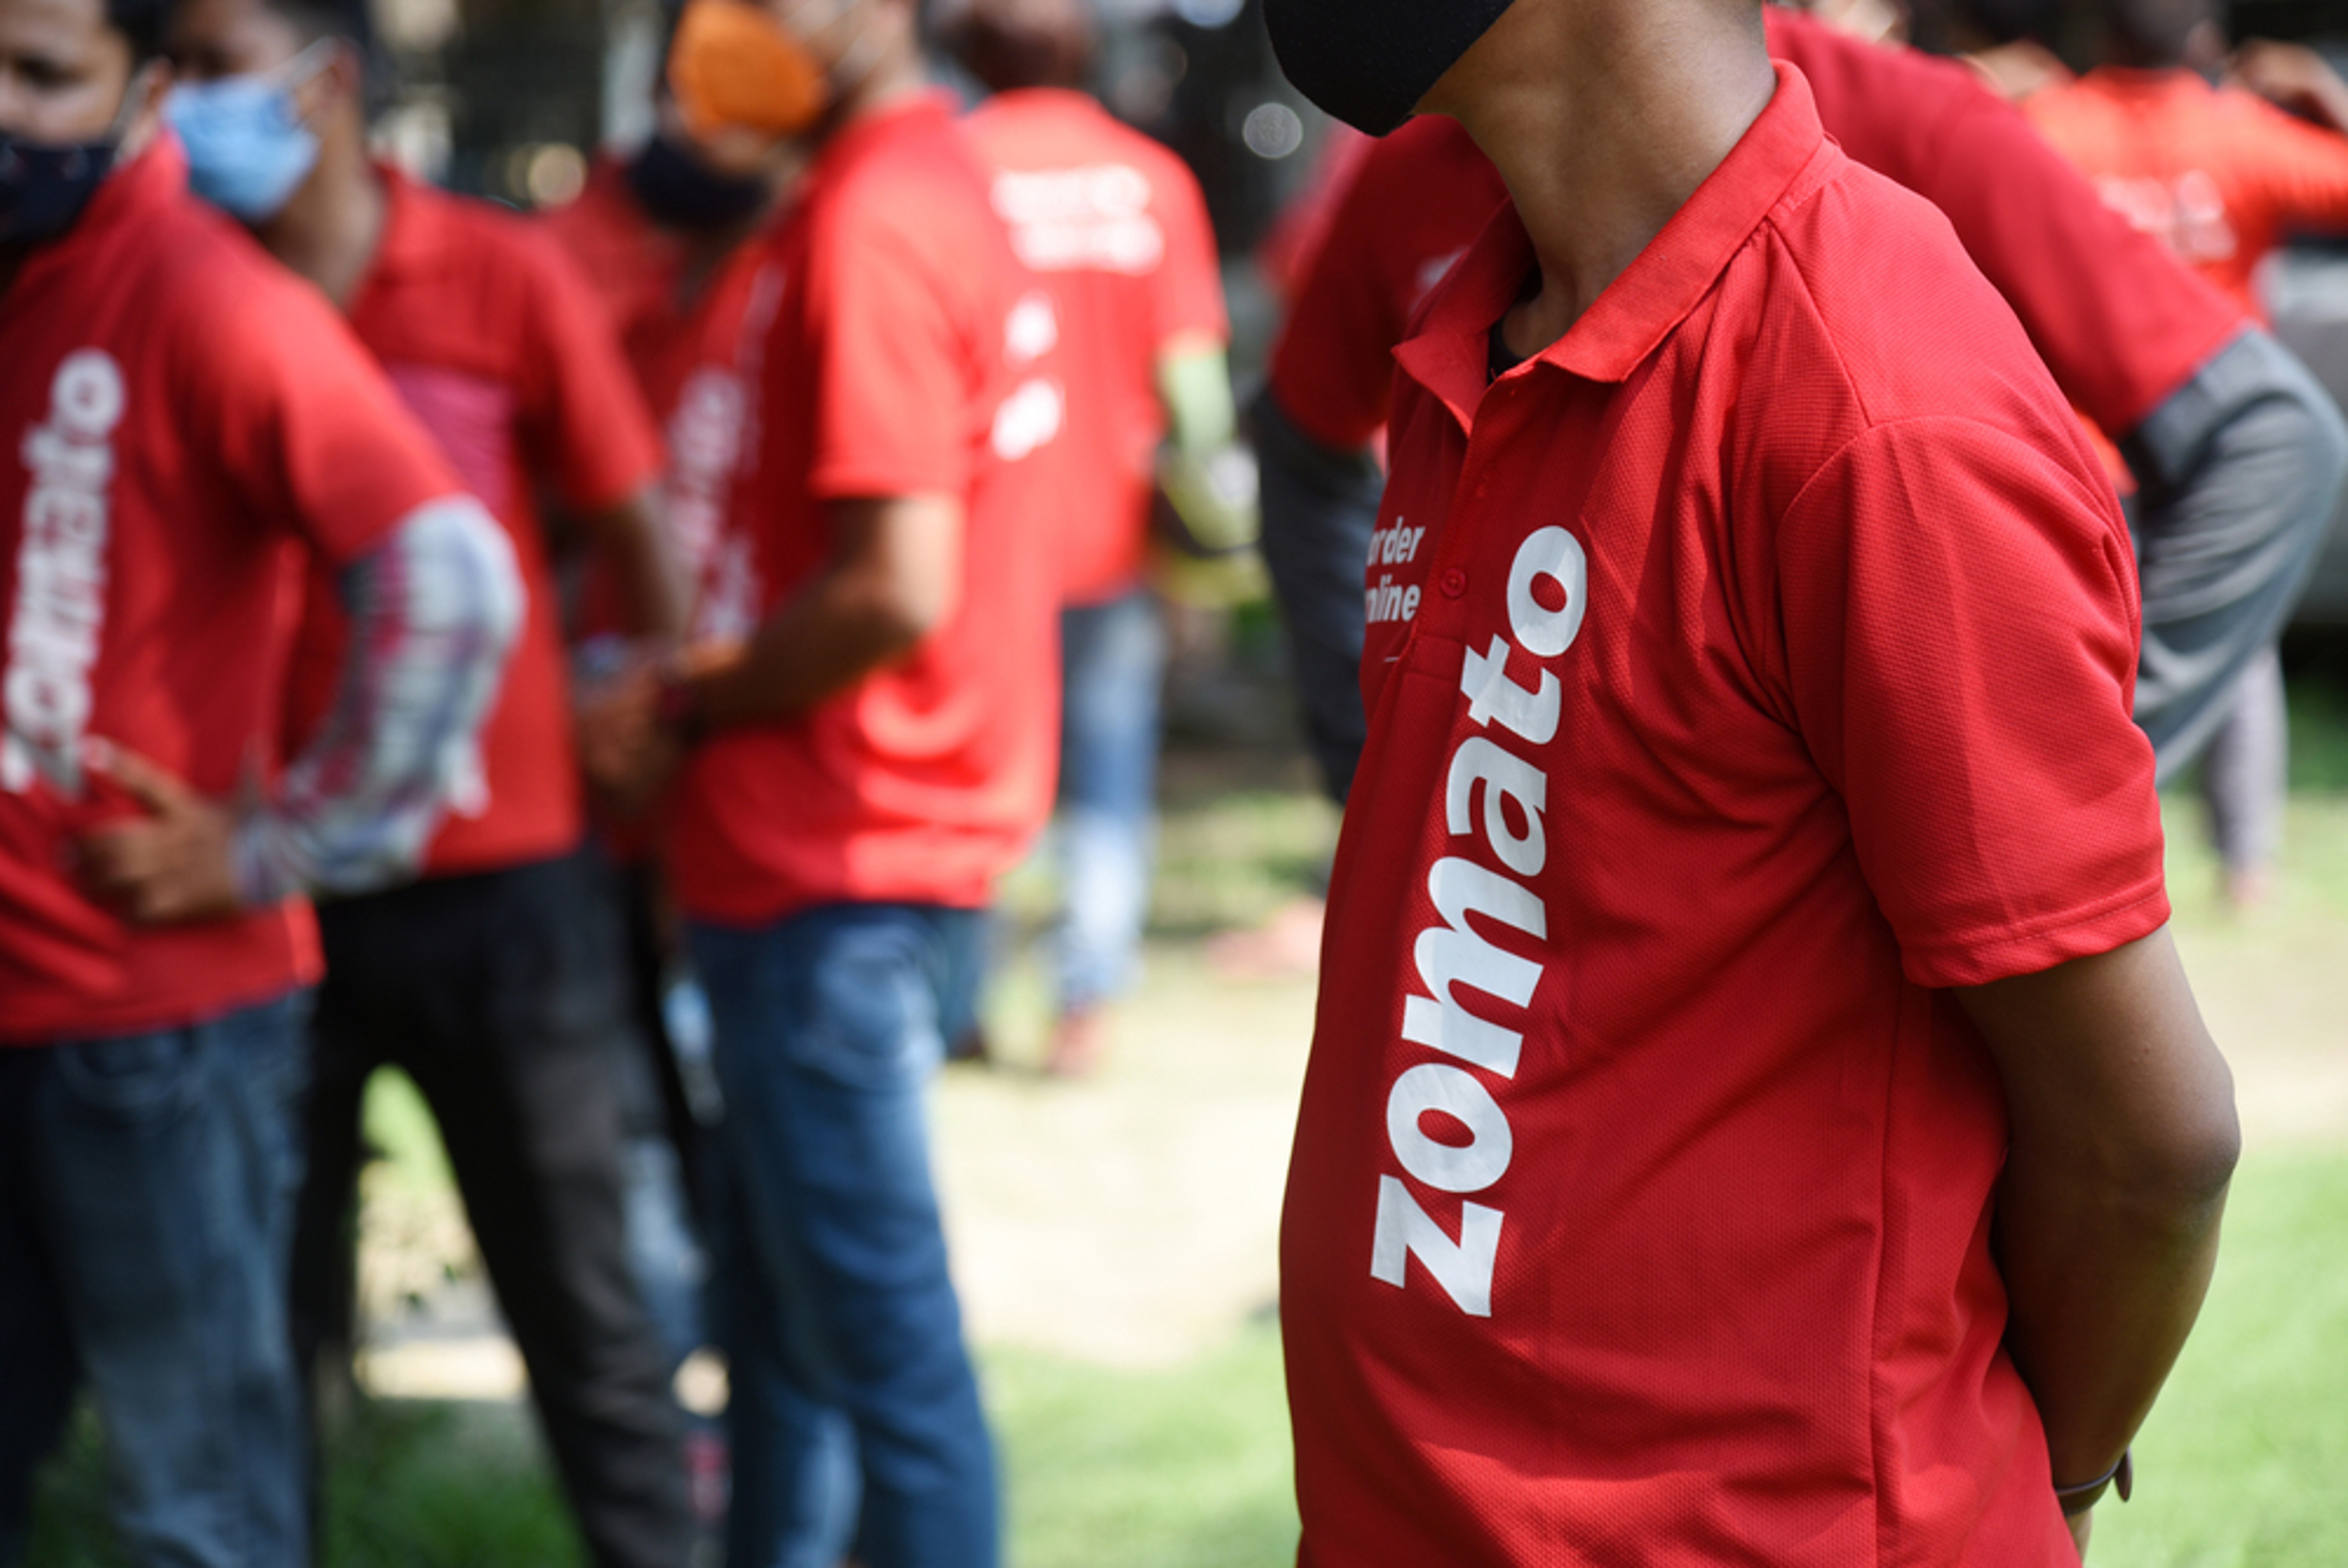 Zomato Apologises For &#39;Irresponsible&#39; And &#39;Unnecessary&#39; Tweet After Internet Backlash